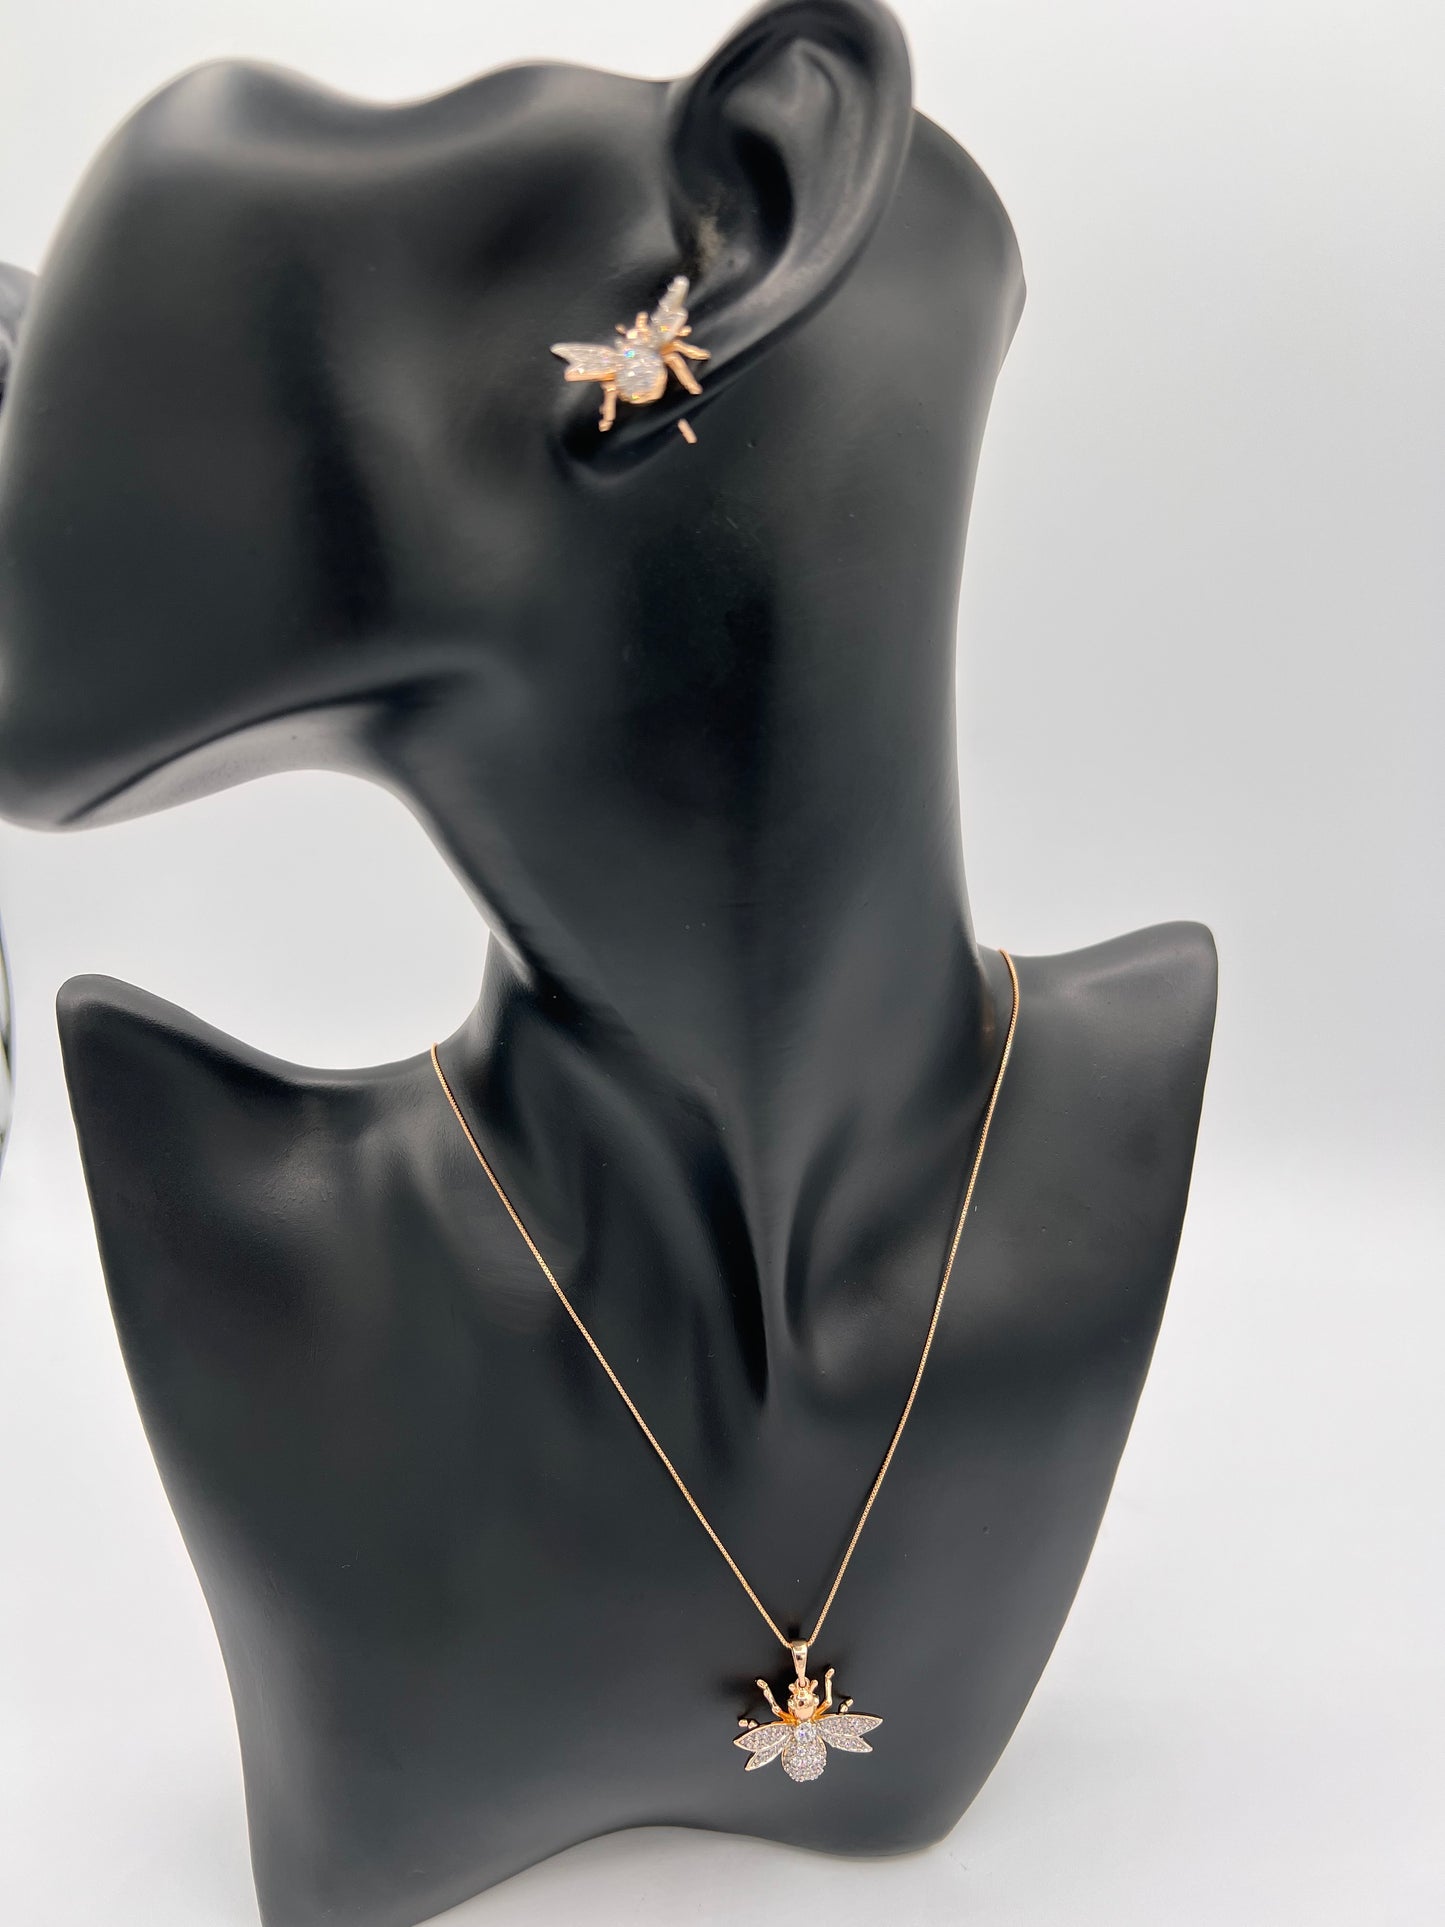 Bee Design Two-Tone Gold-Plated Earrings and Necklace Set – Nature-Inspired Jewelry, Stylish Matching Accessories